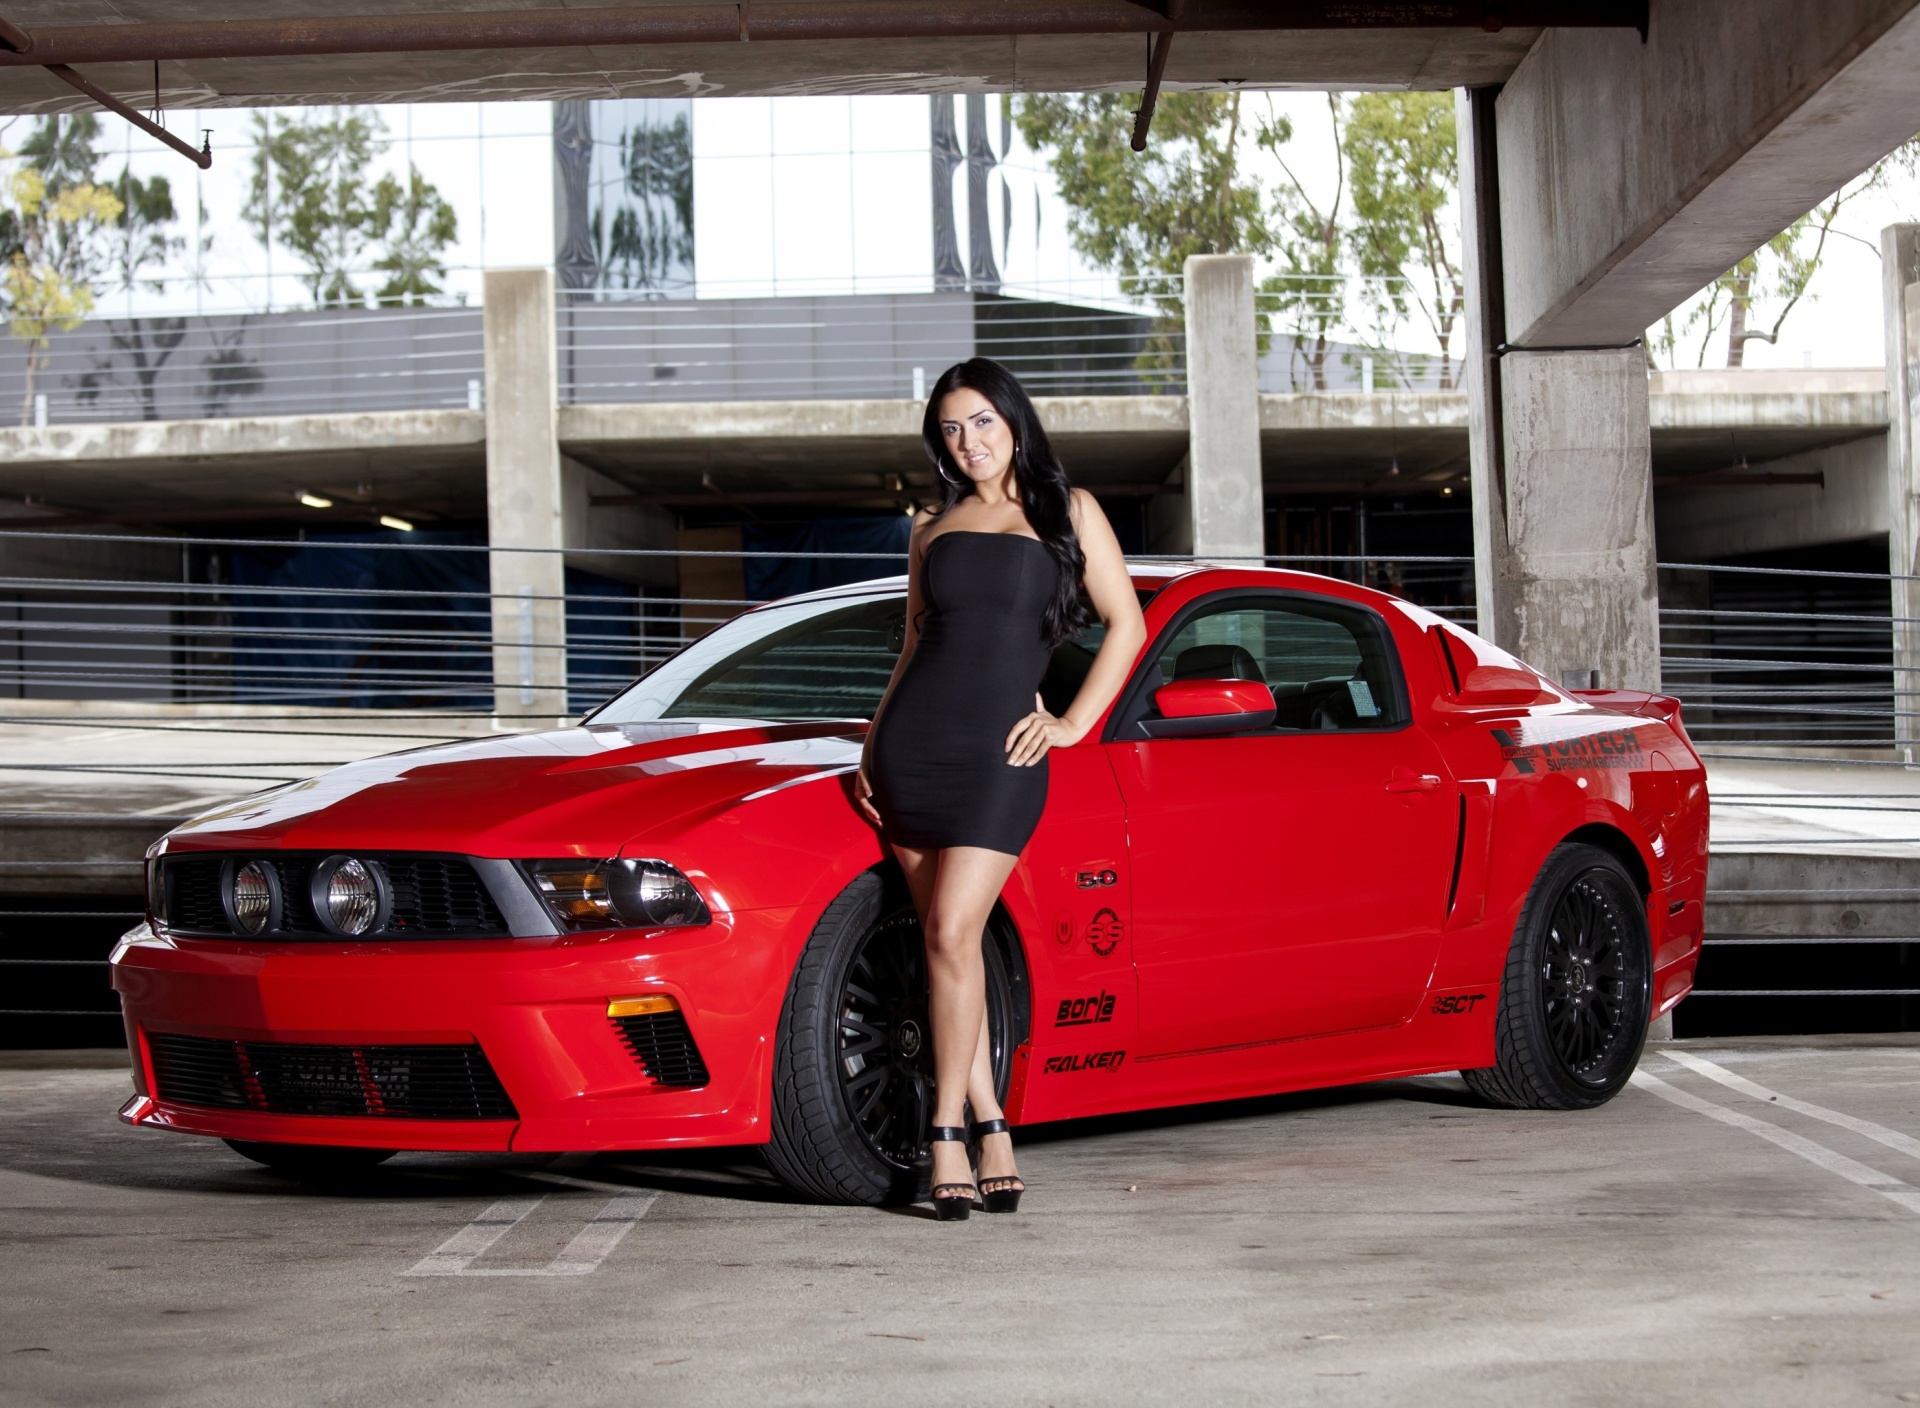 Sfondi Ford Mustang GT Vortech with Brunette Girl 1920x1408